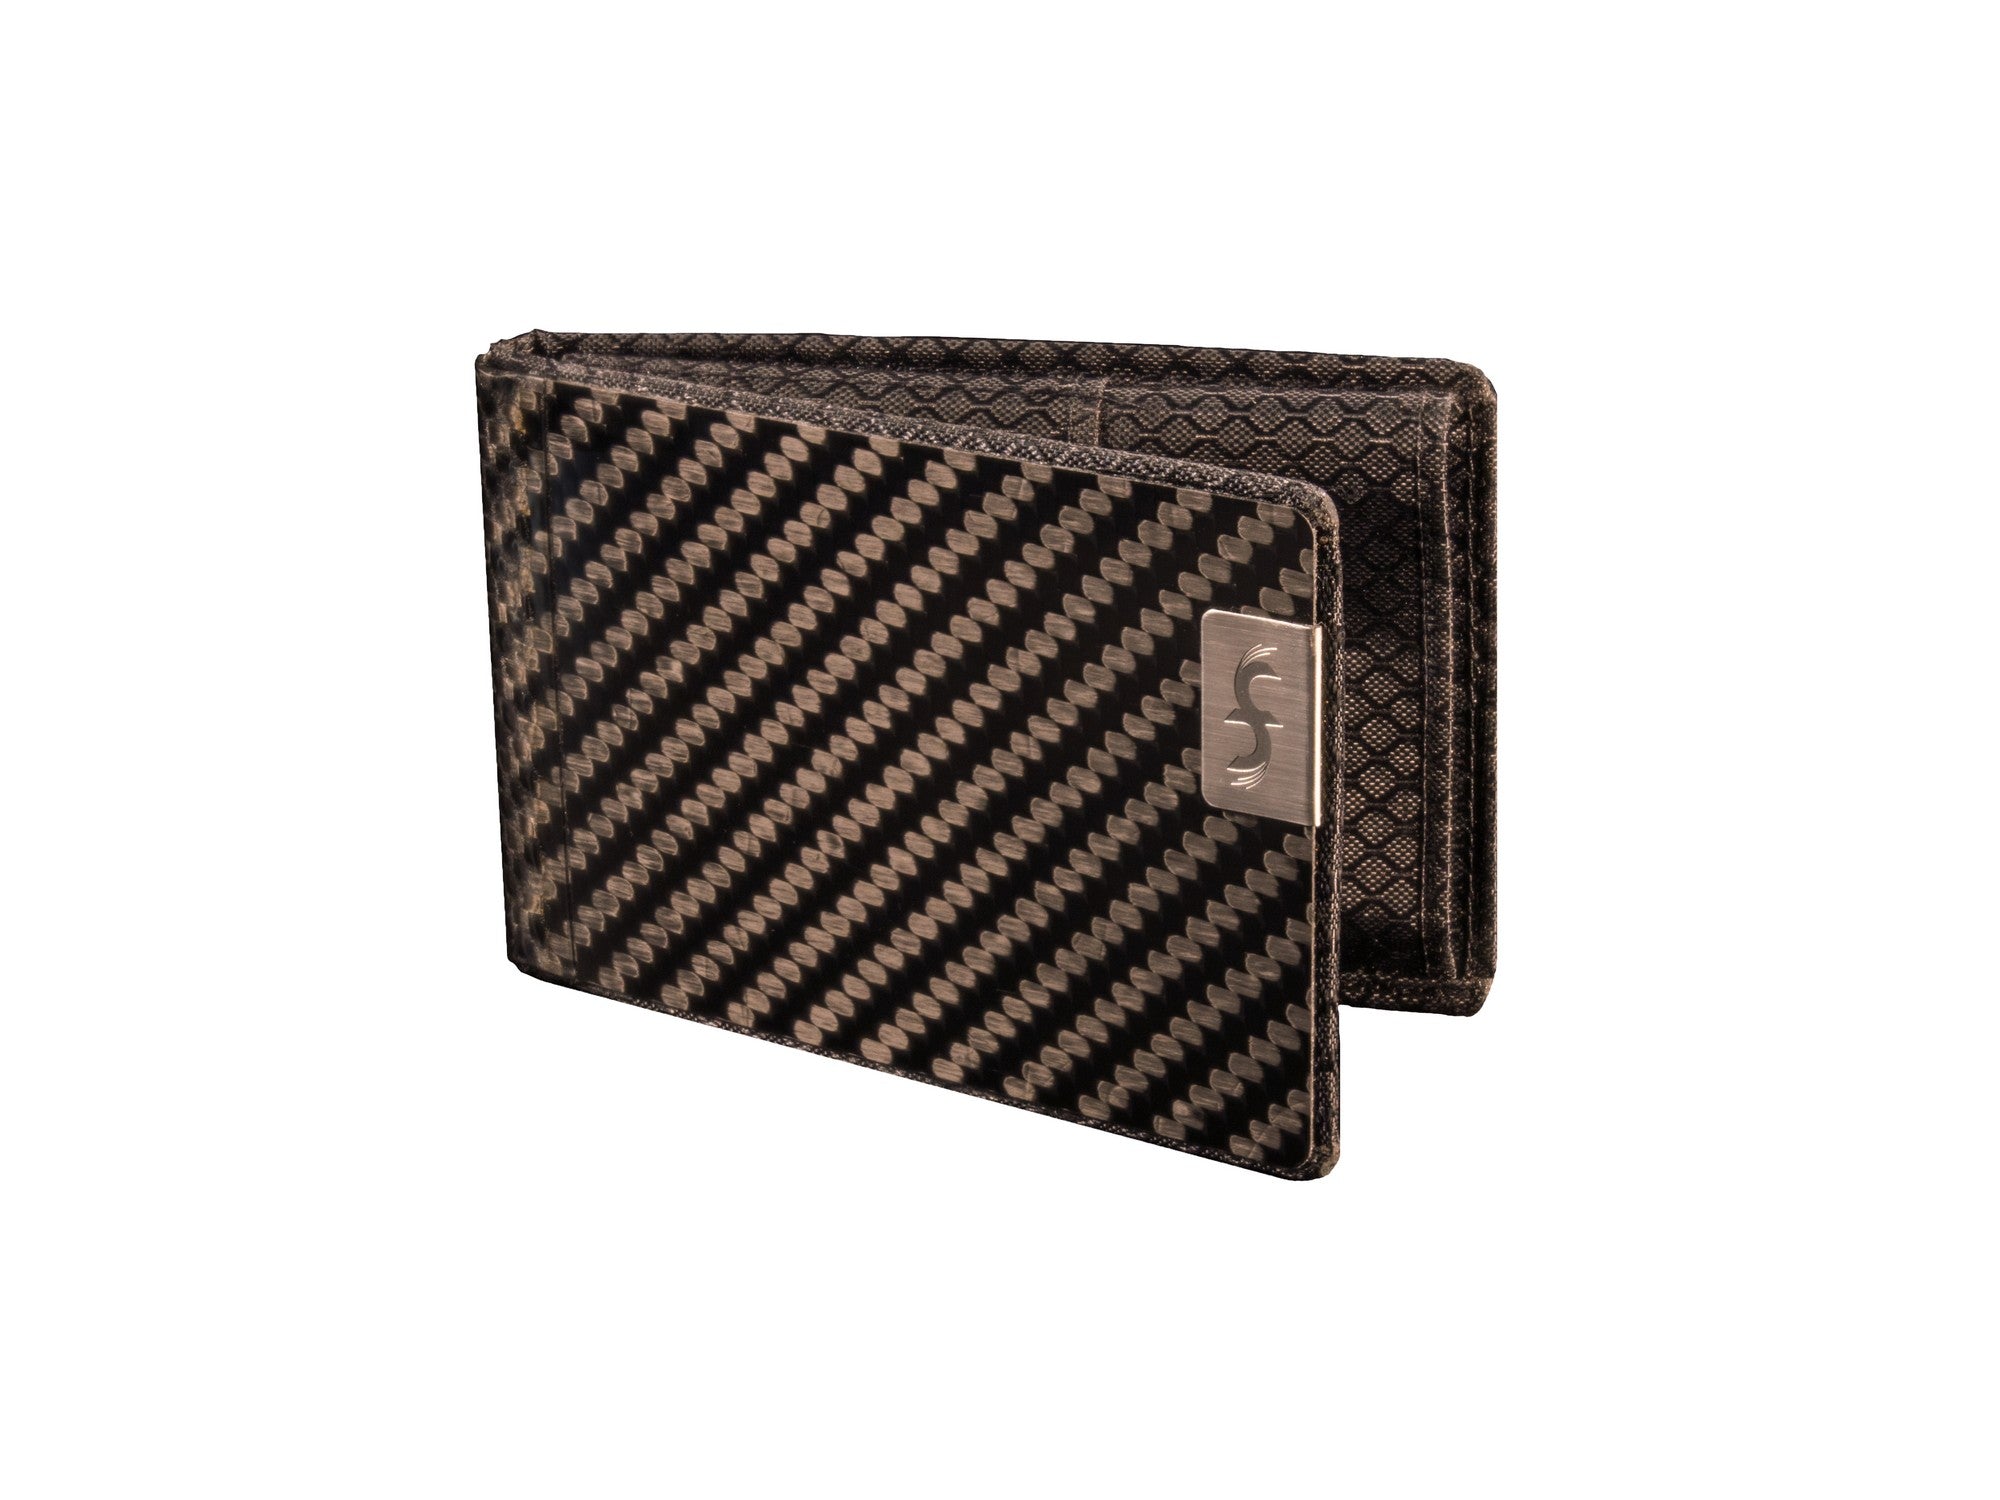 Carbon fiber wallet with business card holder and black ripstop nylon interior